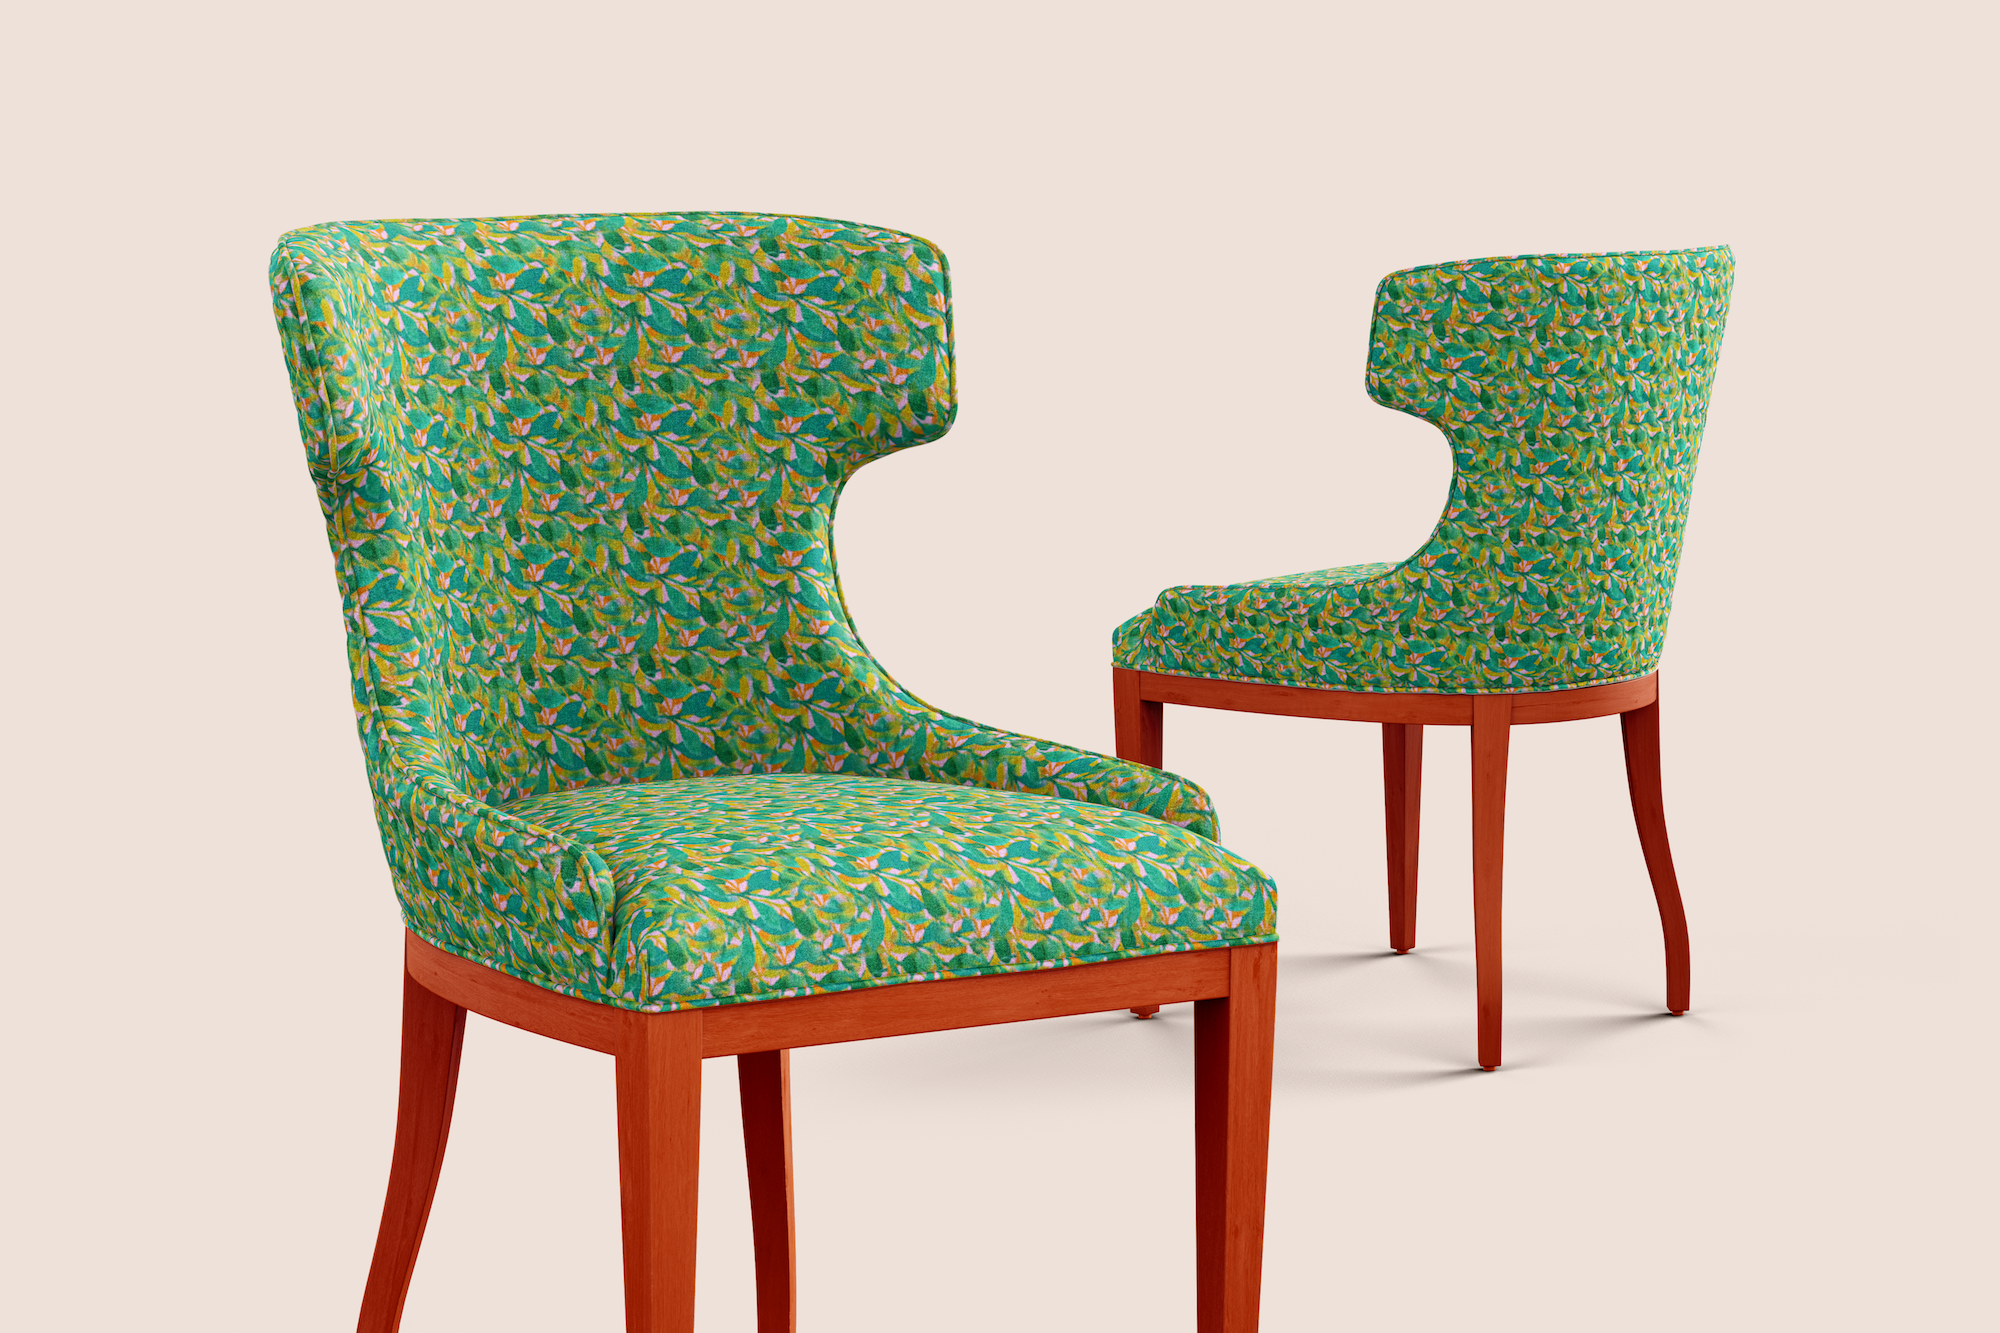 Tropical feel in green pattern design printed on recycled fabric upholstery